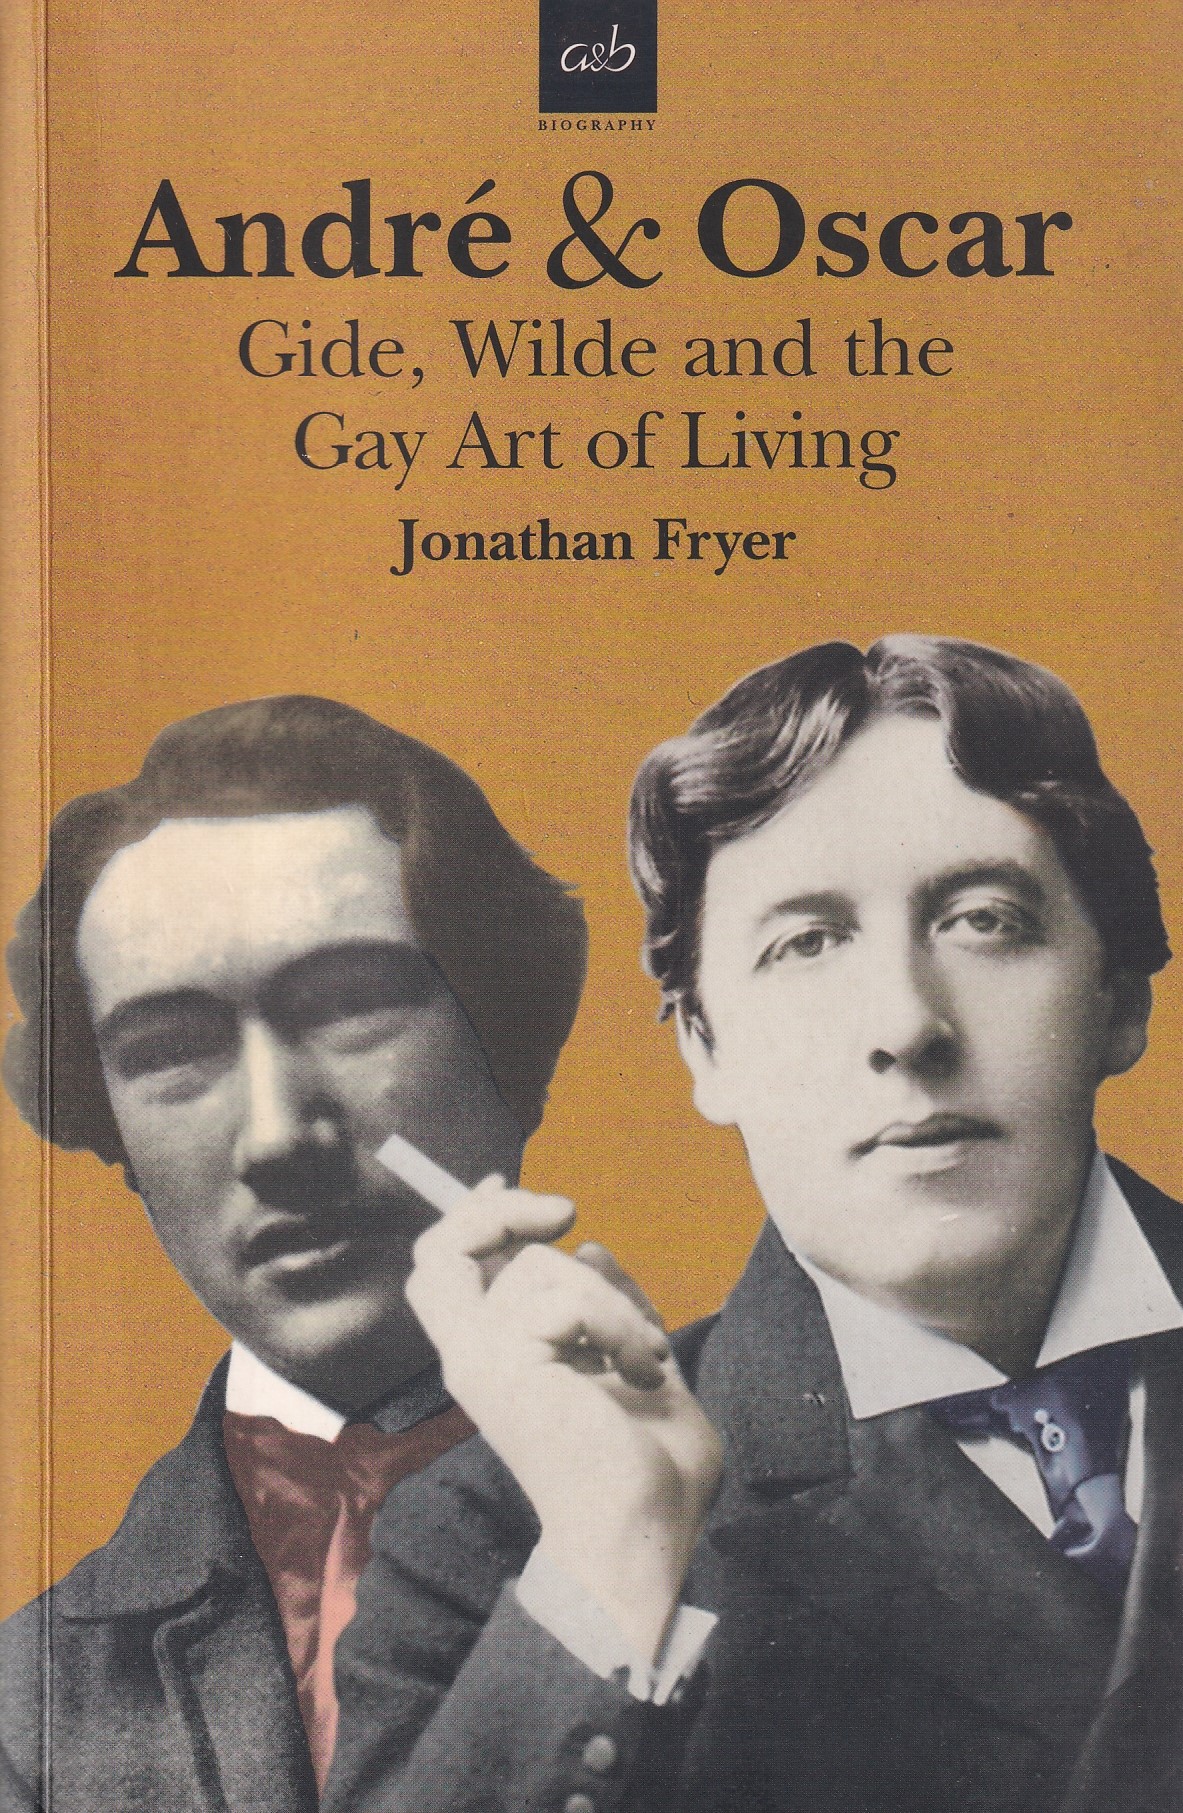 André & Oscar: Gide, Wilde and the Gay Art of Living by Jonathan Fryer